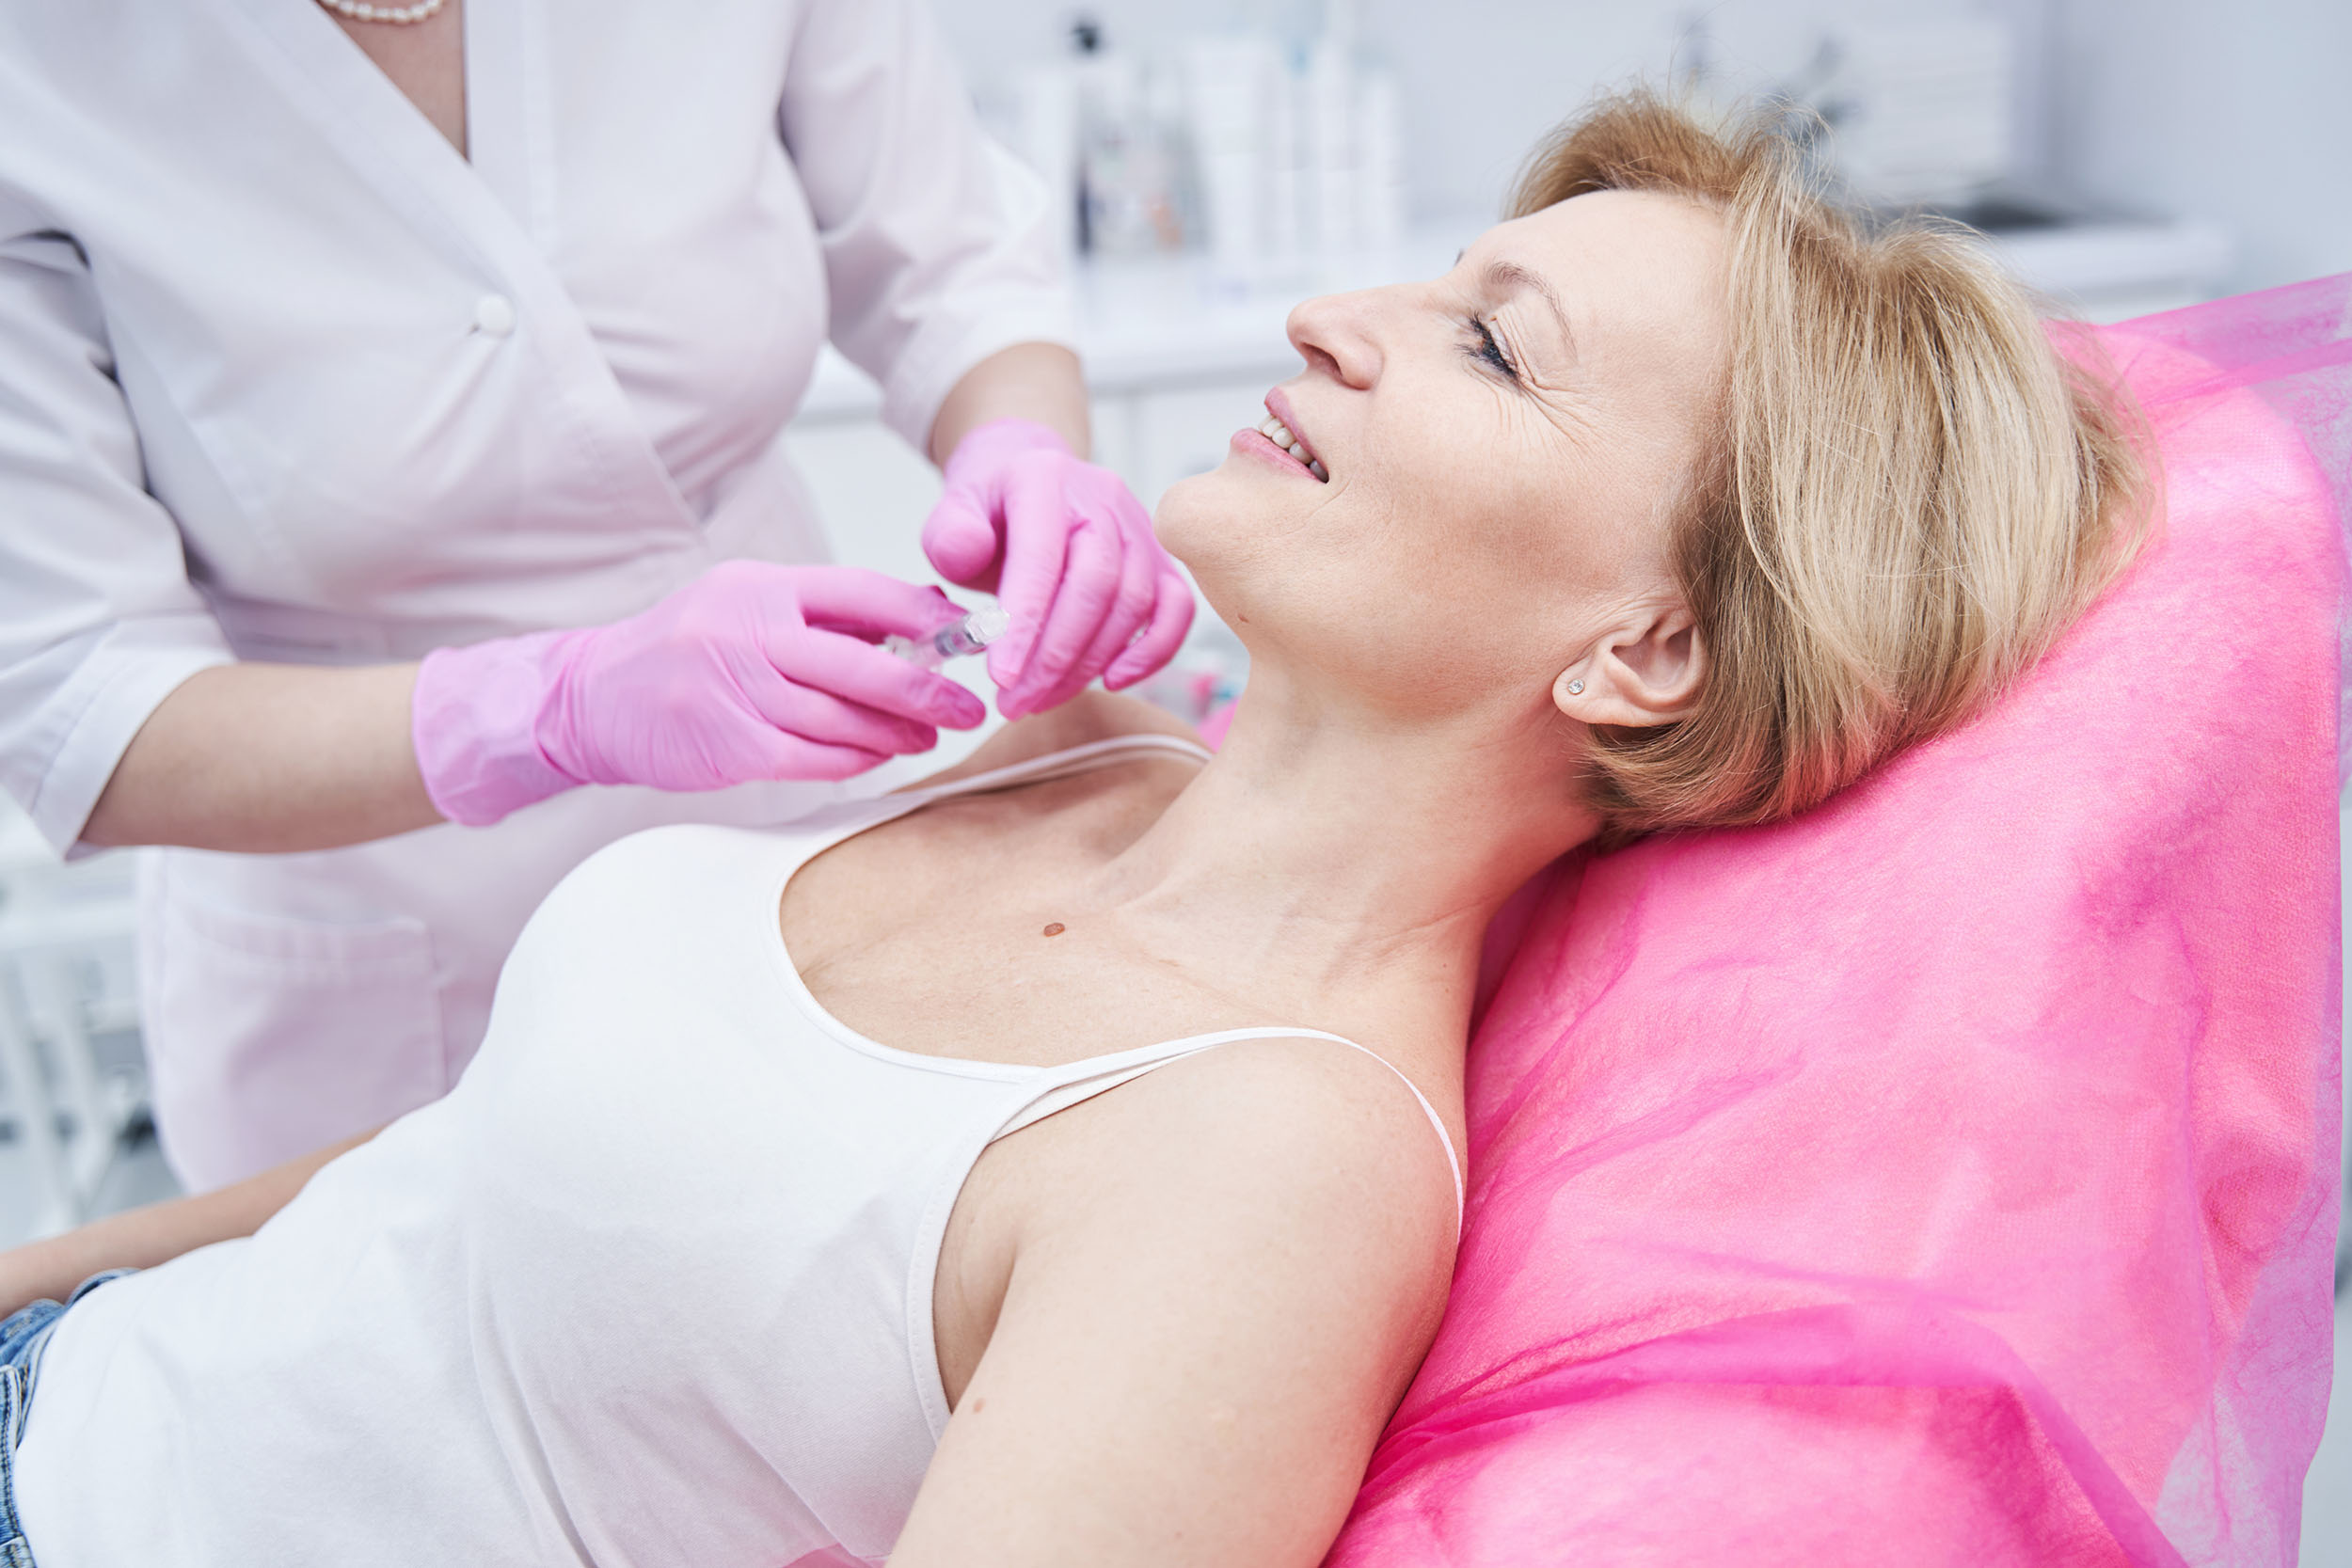 Defining Beauty Wellness & Med Spa in Tampa, Florida, offers Kybella